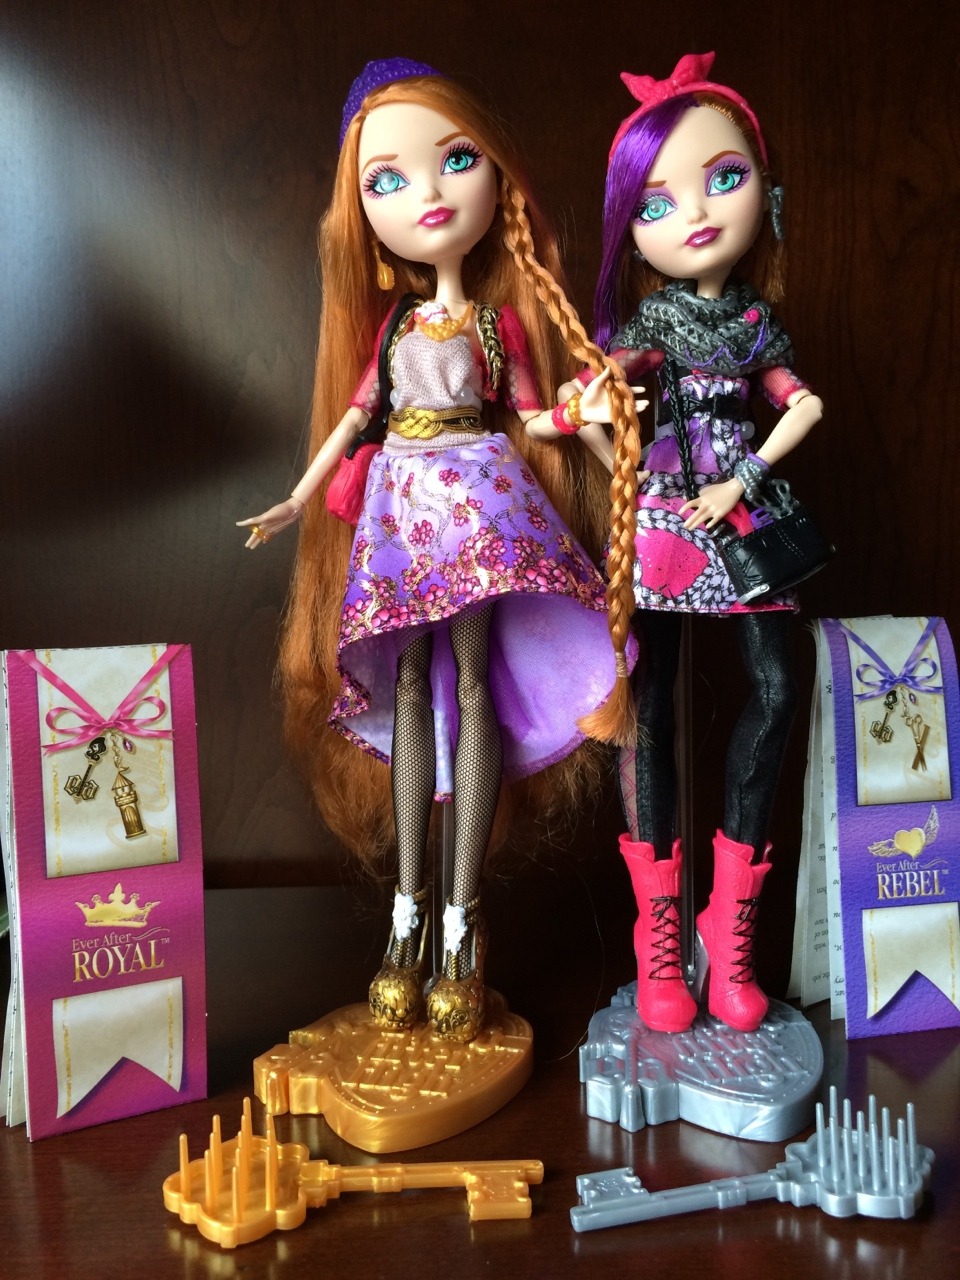 frozenmonsterhigh:

Holly and Poppy O’hair just arrived
